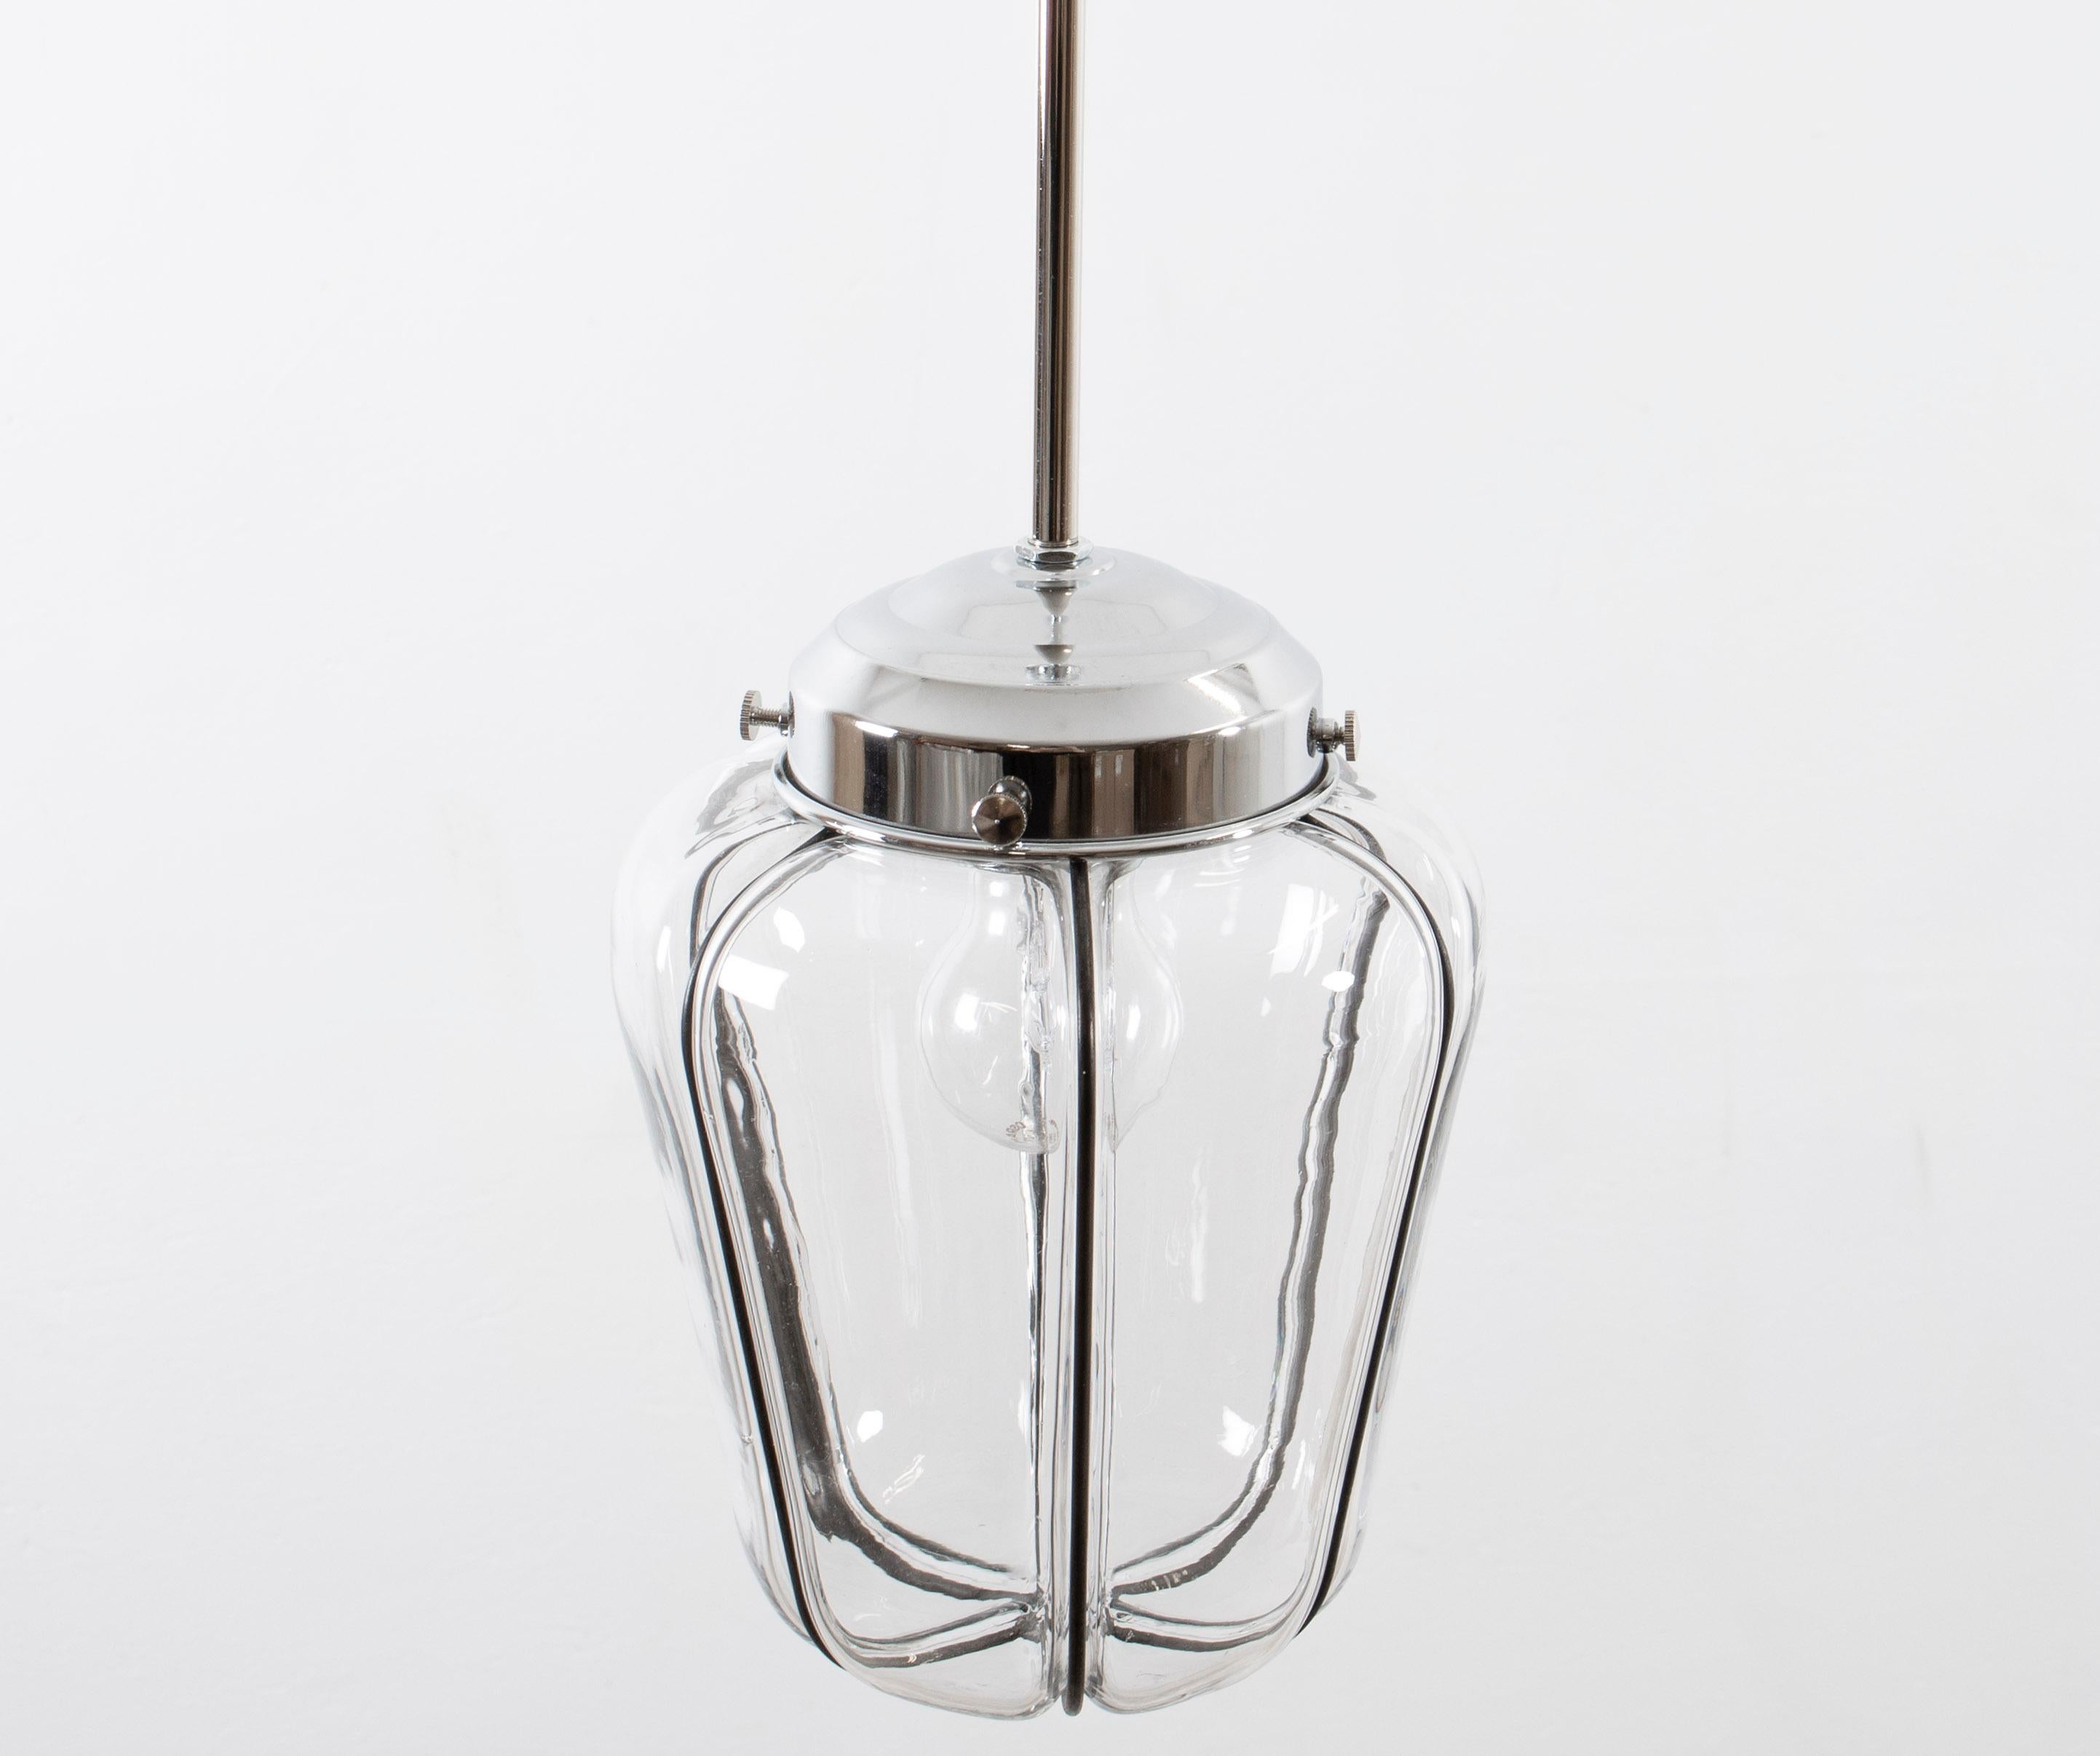 Functionalist Ceiling Light, Norway, 1950s In Good Condition For Sale In Oslo, NO